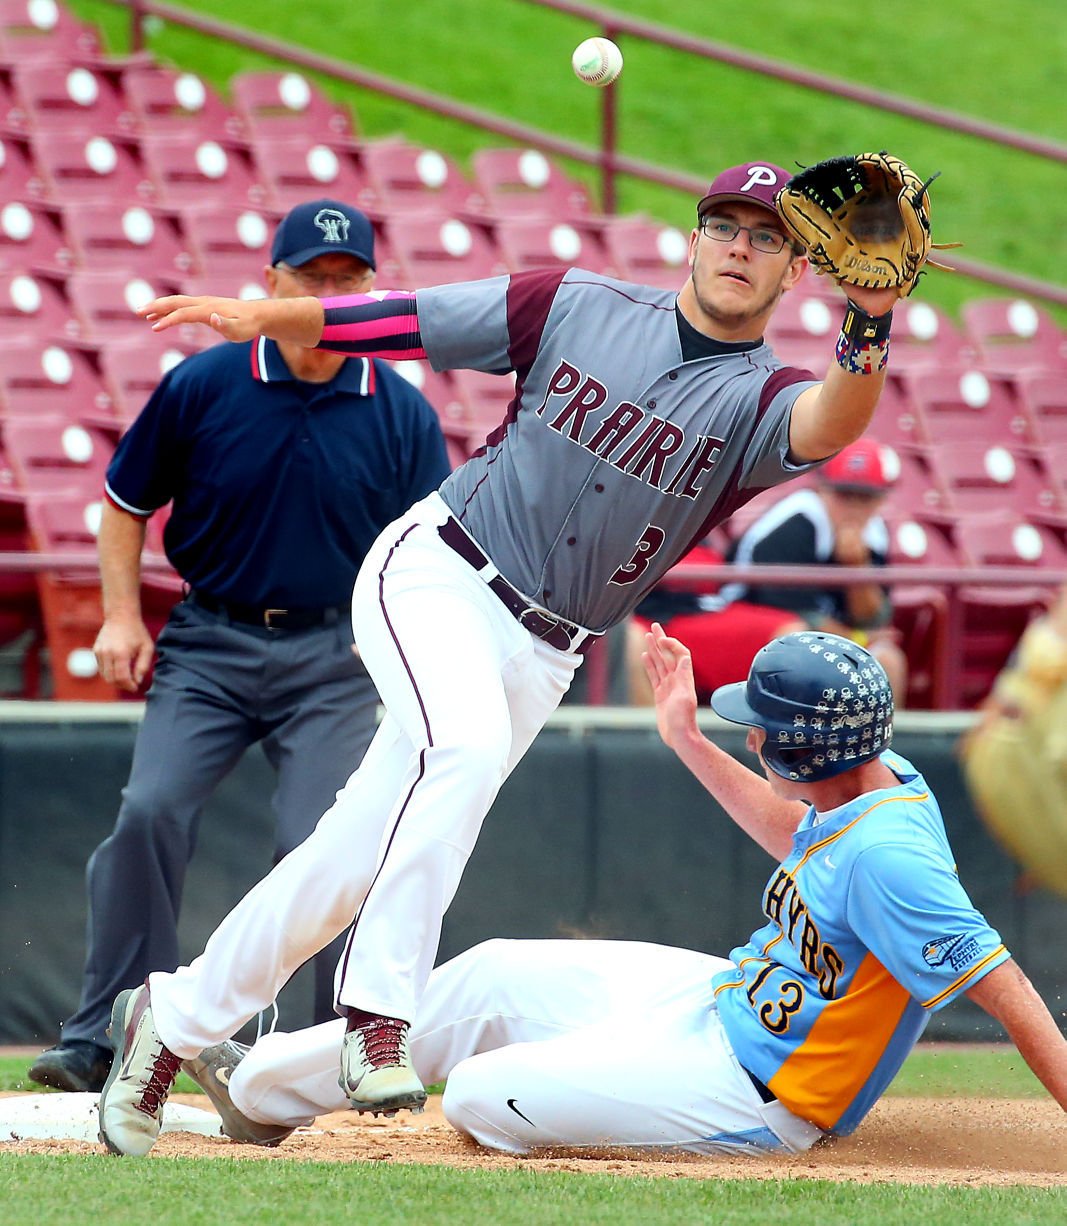 Prairie du Chien knocked off in Division 3 title game  Sports